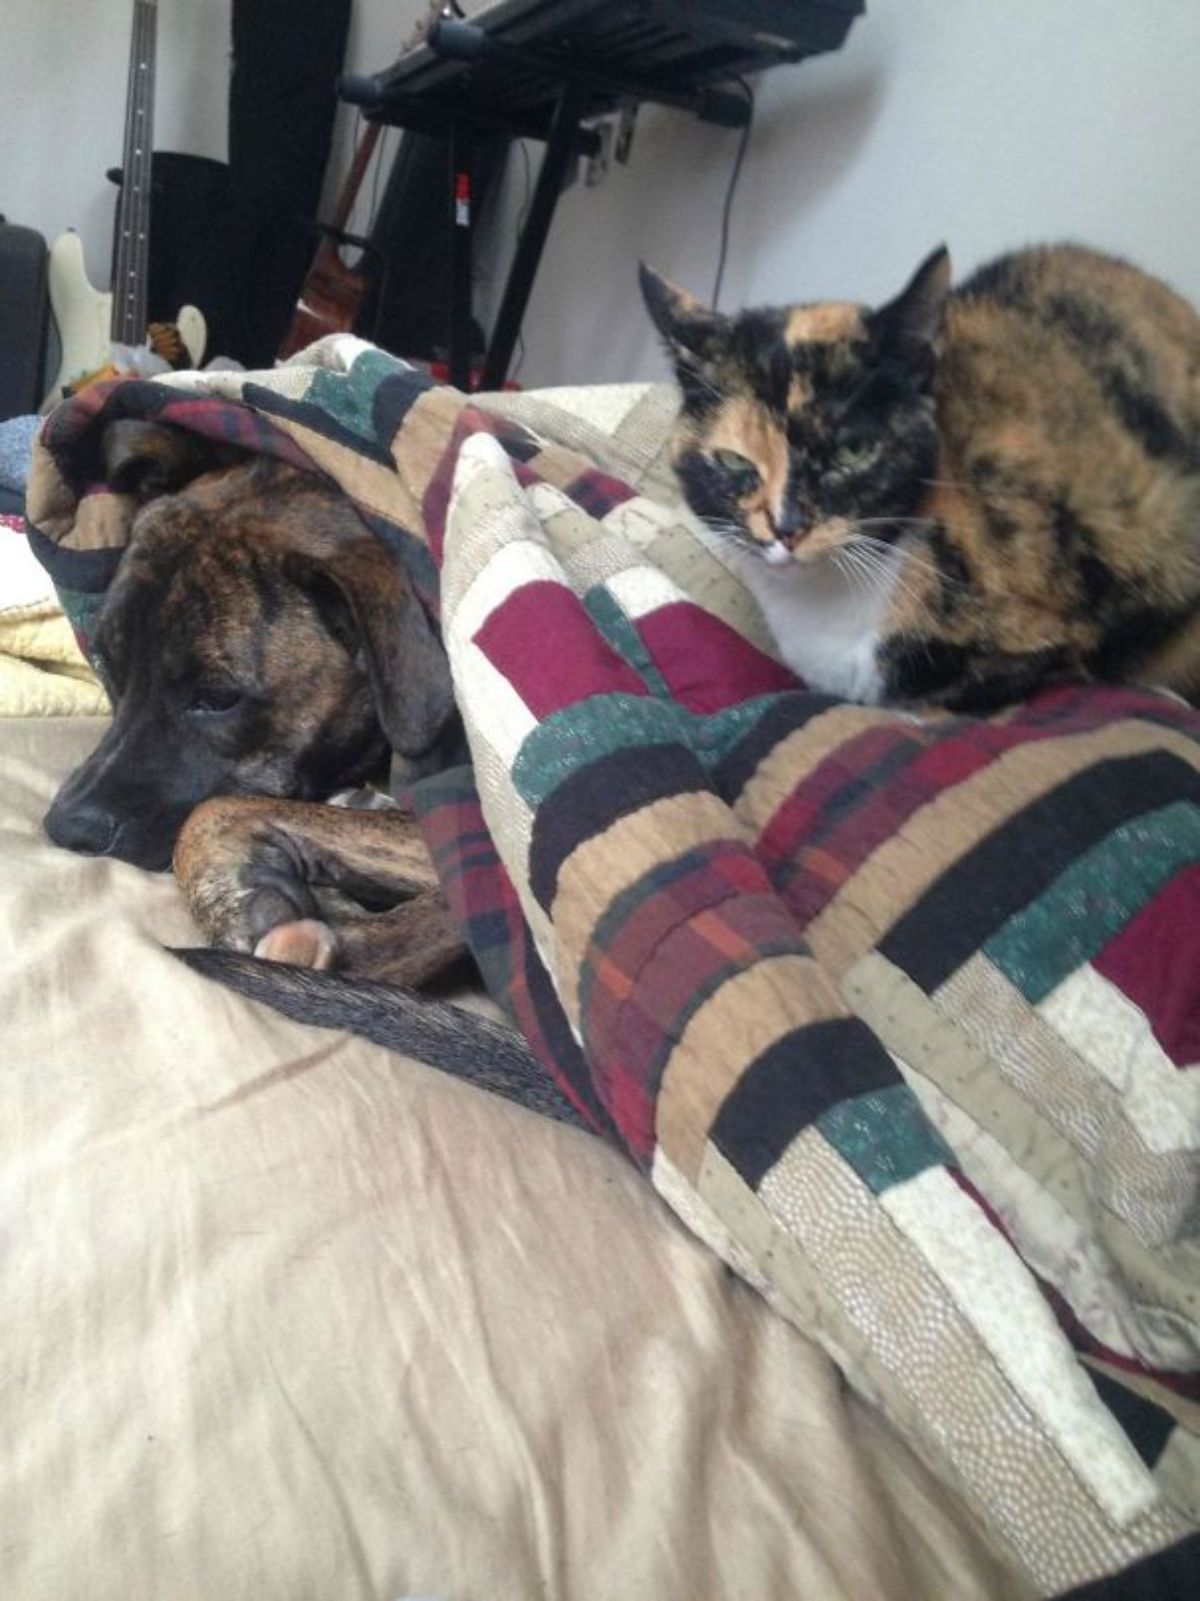 black orange and white cat sitting on a colourful blanket with a black and brown brindle dog under it